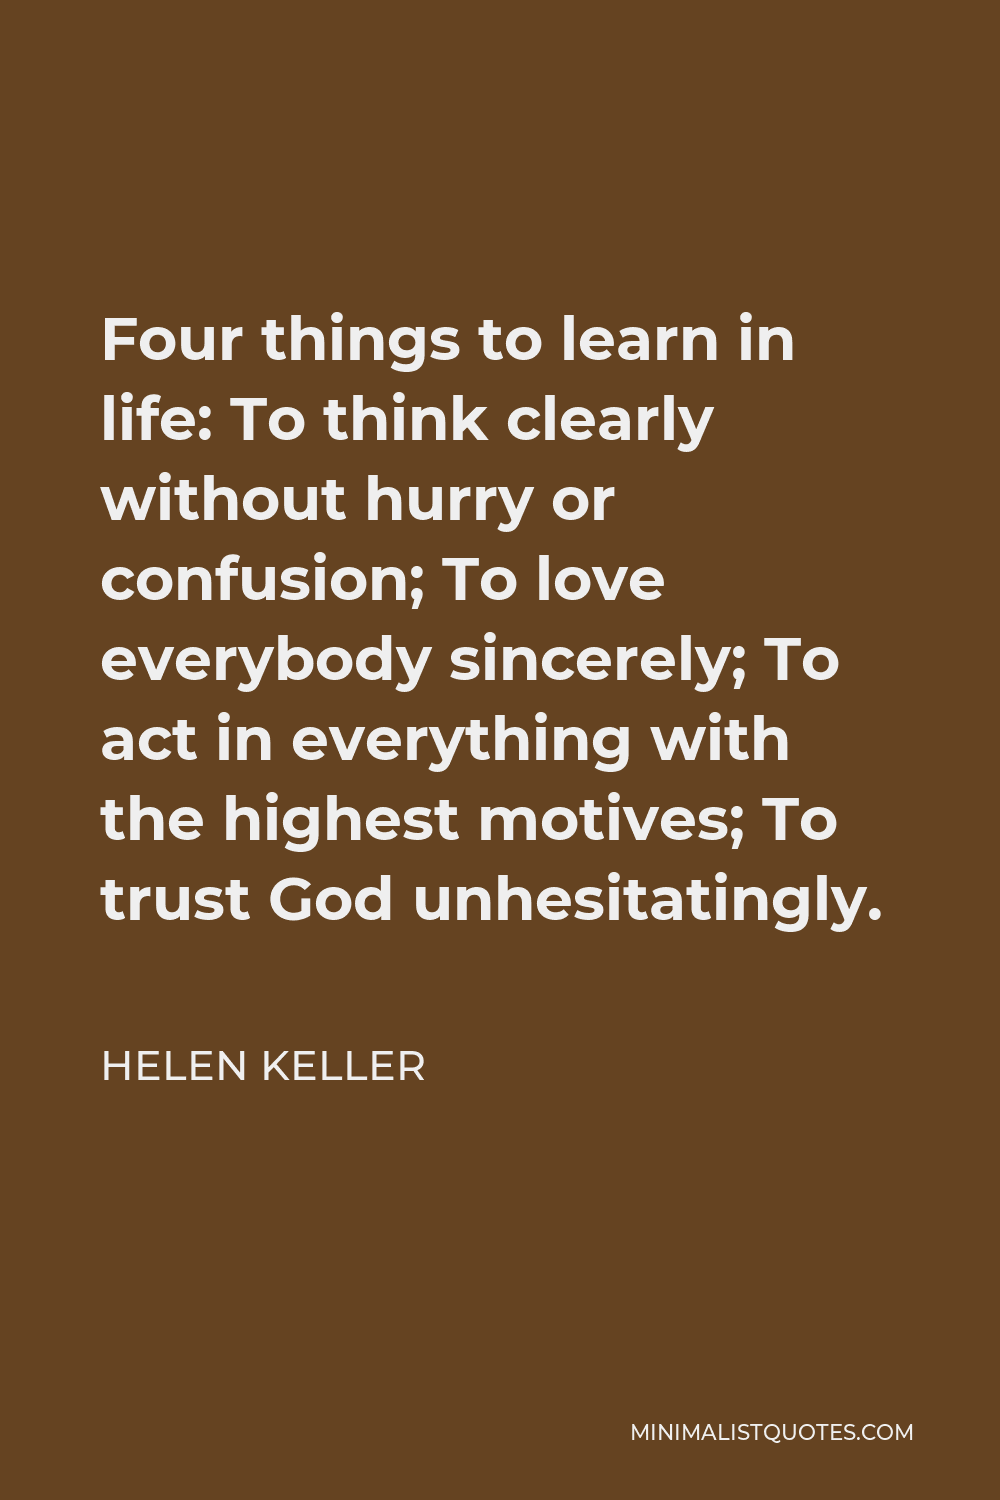 Helen Keller Quote - Four things to learn in life: To think clearly without hurry or confusion; To love everybody sincerely; To act in everything with the highest motives; To trust God unhesitatingly.